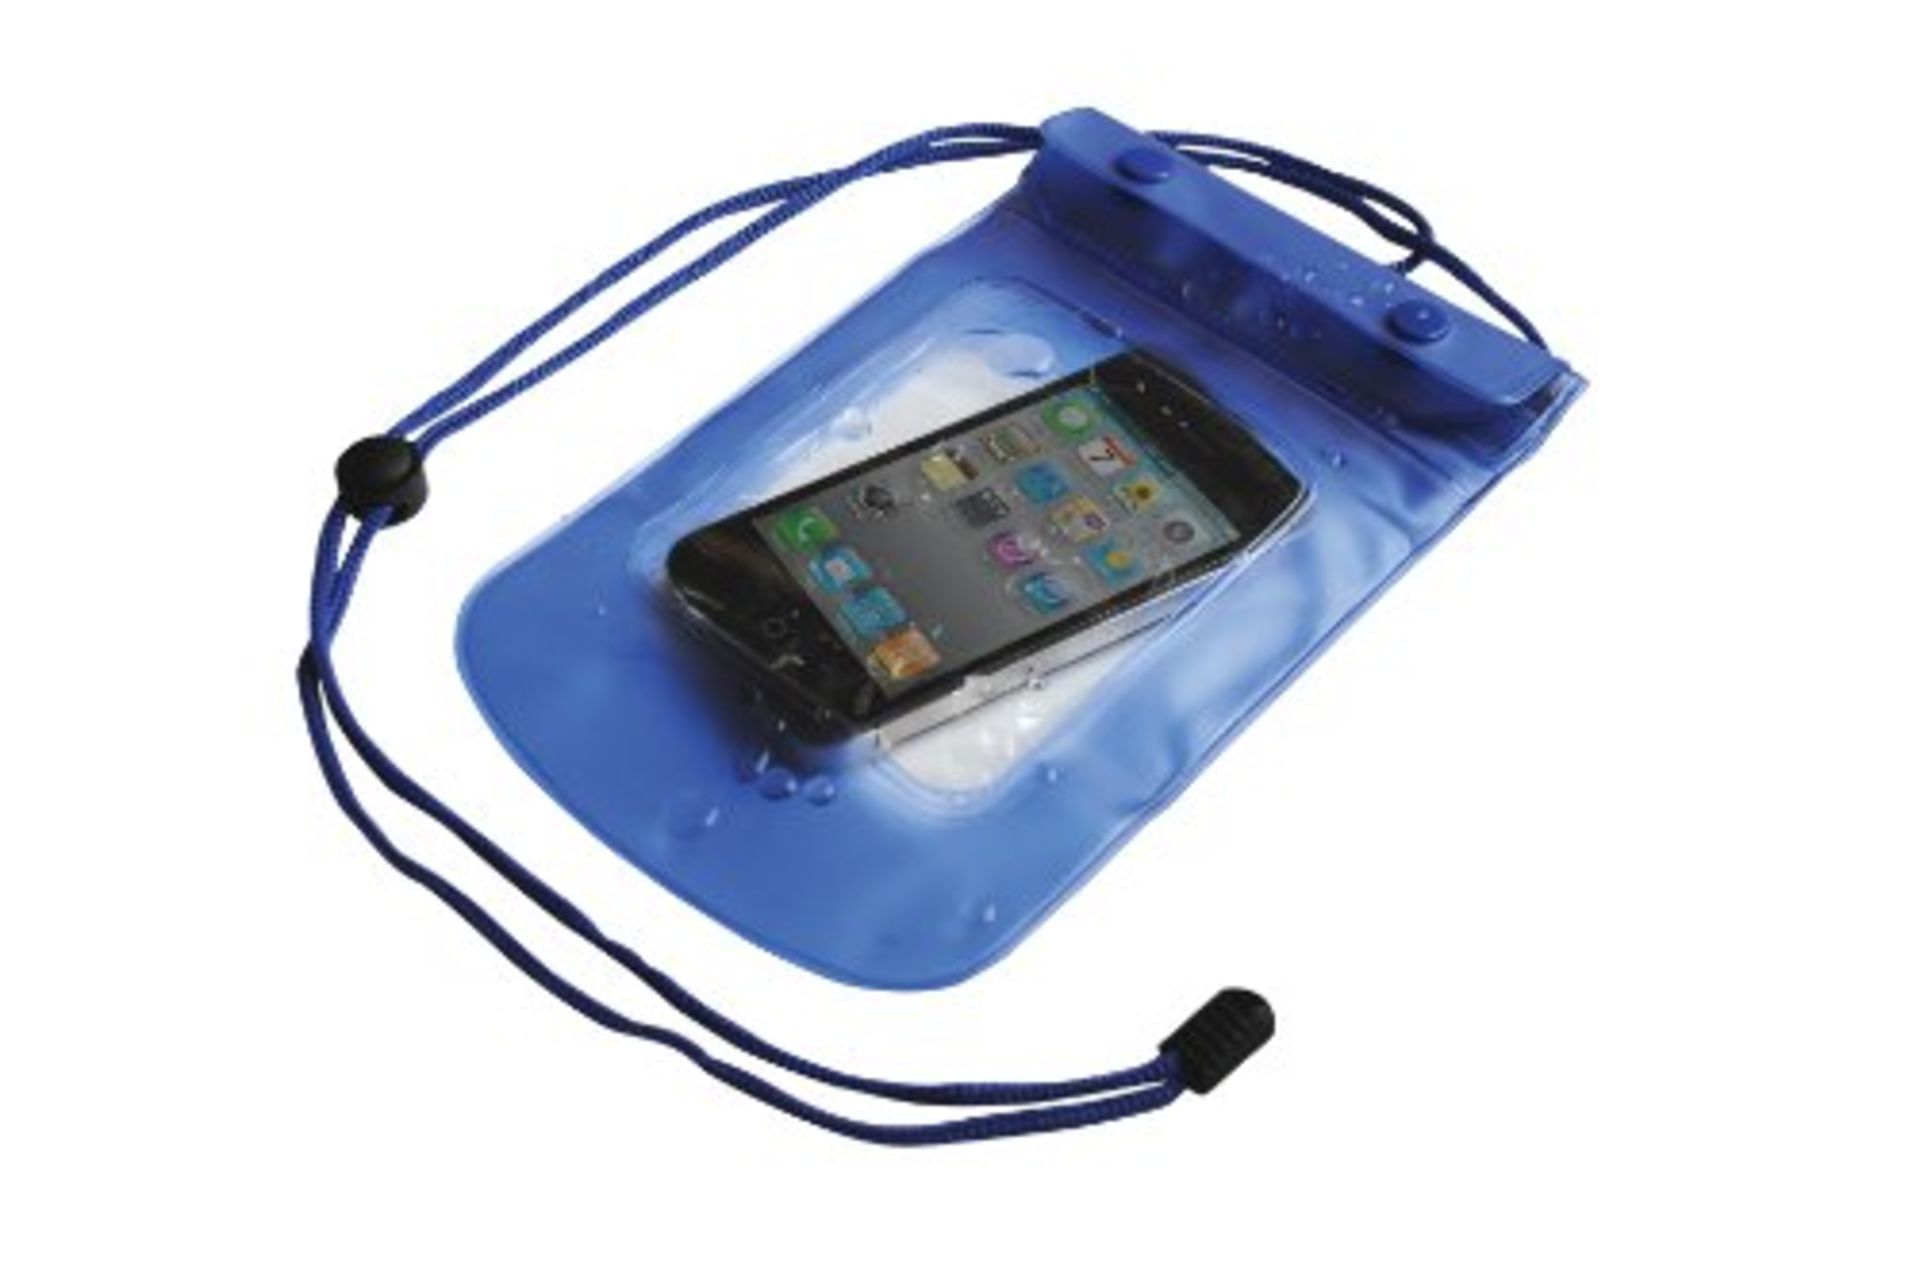 V *TRADE QTY* Grade A 2 Pack Waterproof Pouches 12x22cms Ideal For Phones & Cameras Etc X 8 YOUR BID